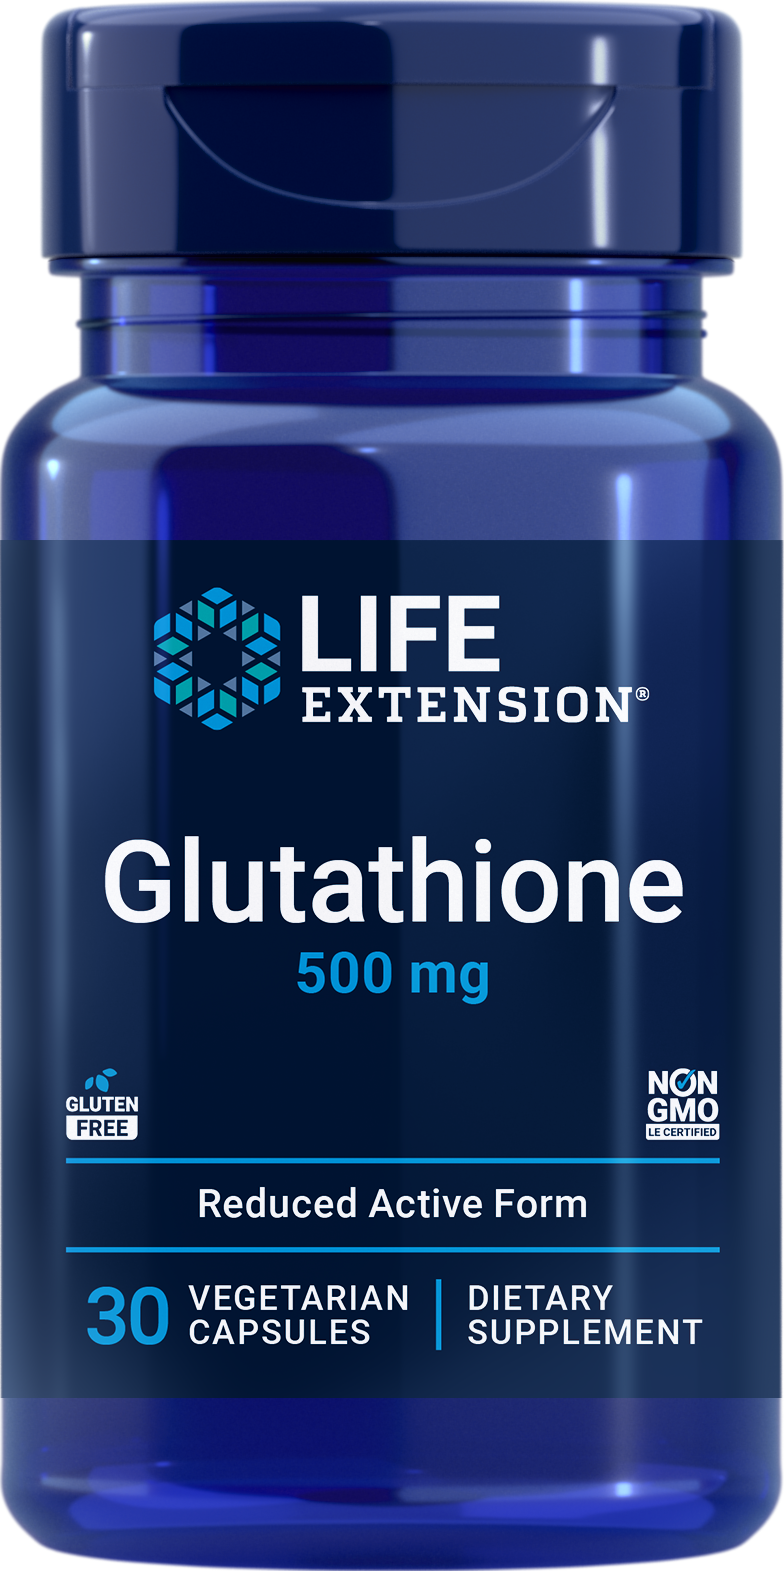 Life Extension Europe Glutathione 500 mg, 30 vegetarian capsules to protect cells from oxidative stress and much more